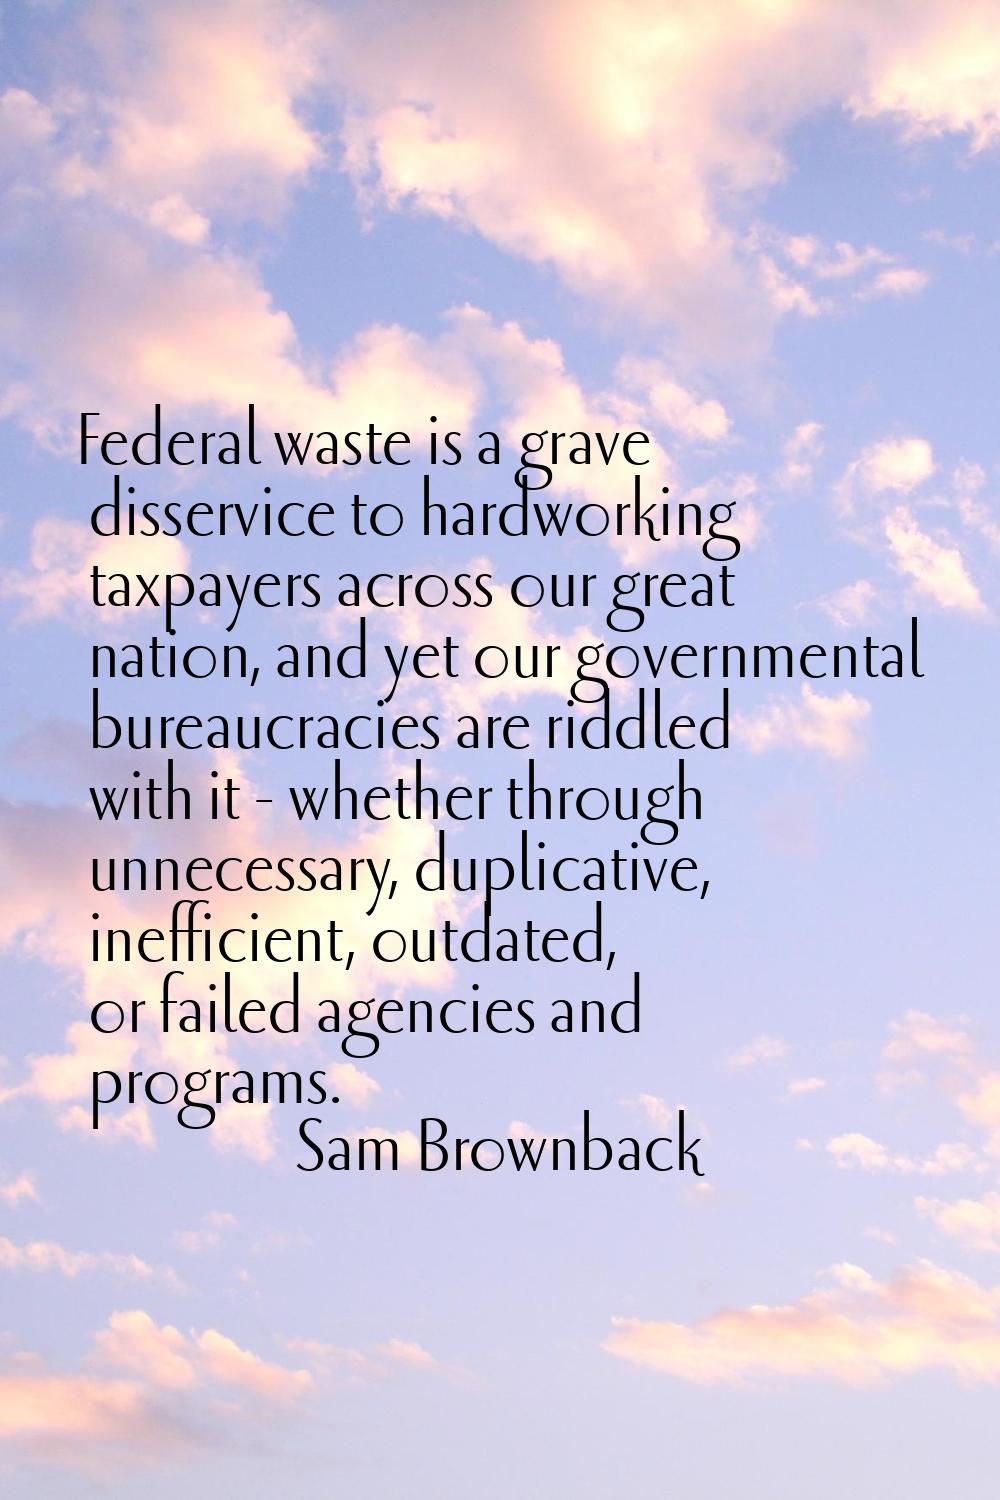 Federal waste is a grave disservice to hardworking taxpayers across our great nation, and yet our g